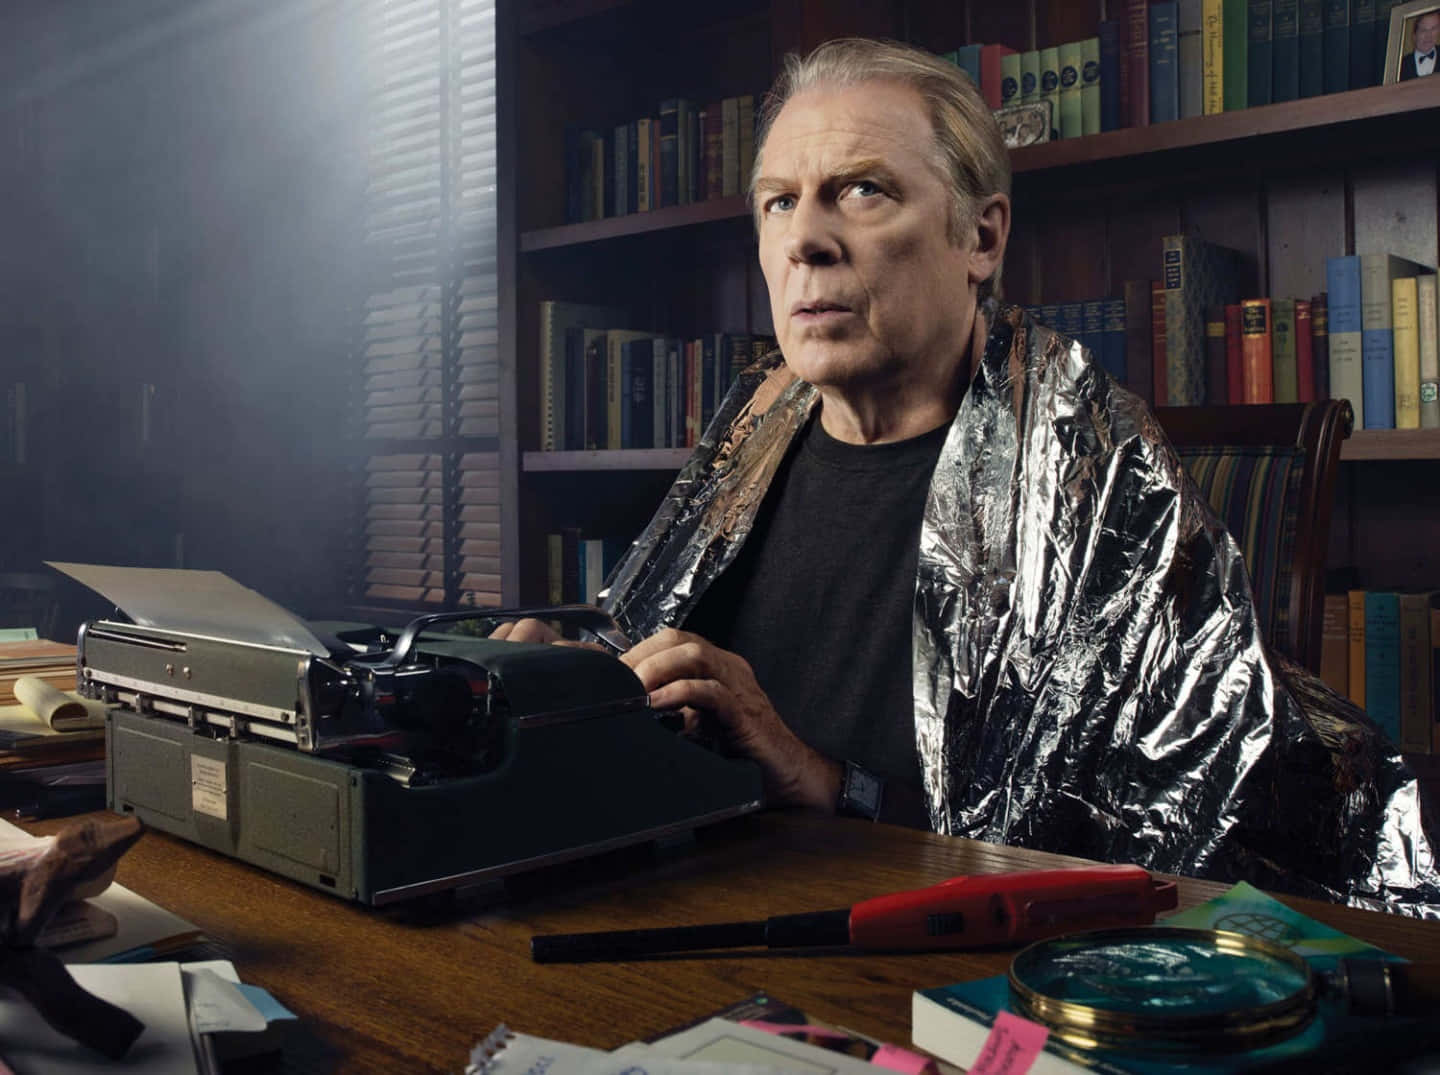 Michael McKean on the set of his new movie. Wallpaper